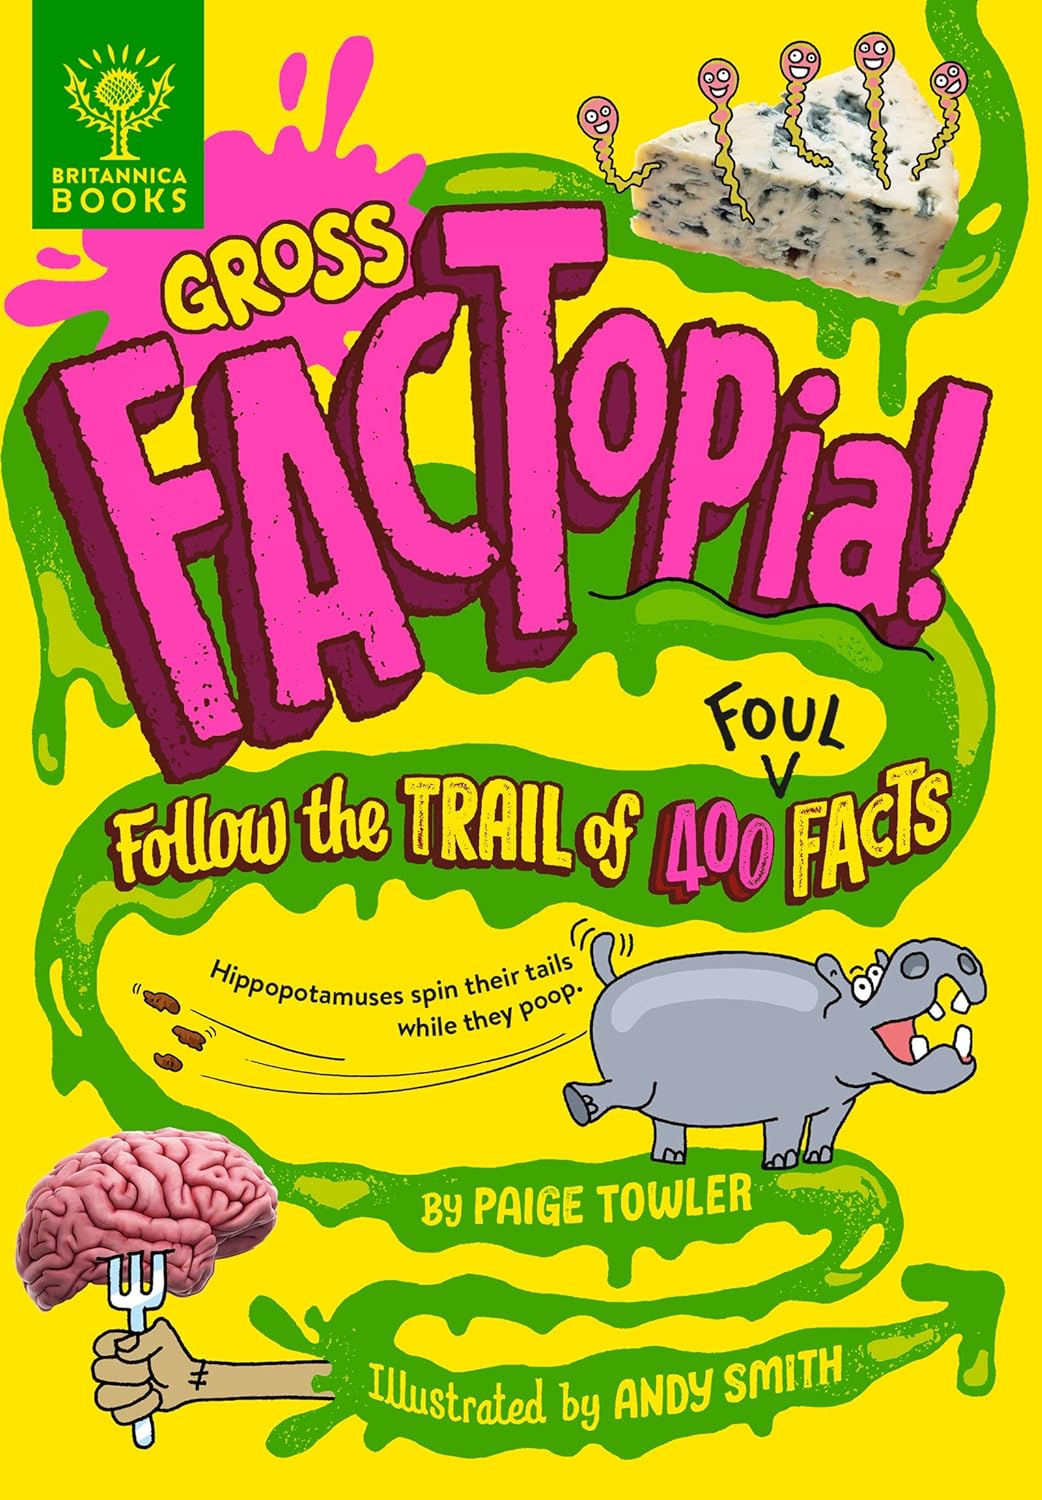 Gross FACTopia!: Follow the Trail of 400 Foul Facts Hardcover, Best Gifts For 8-Year-Old Boys